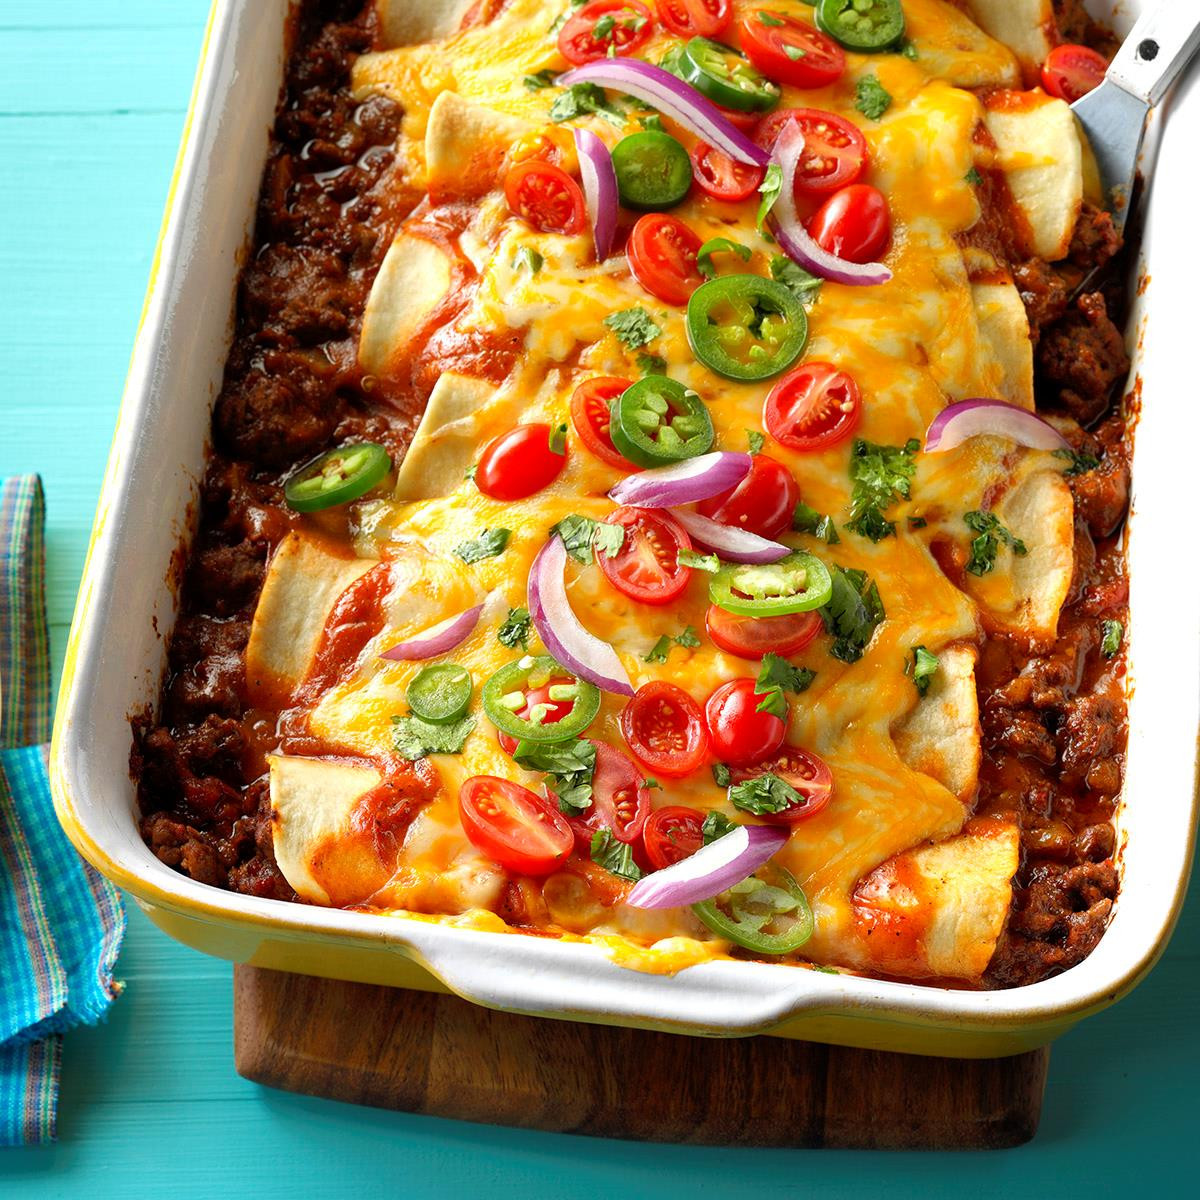 Mexican Food Ideas For Dinner Party
 Top 10 Mexican Dinner Recipes